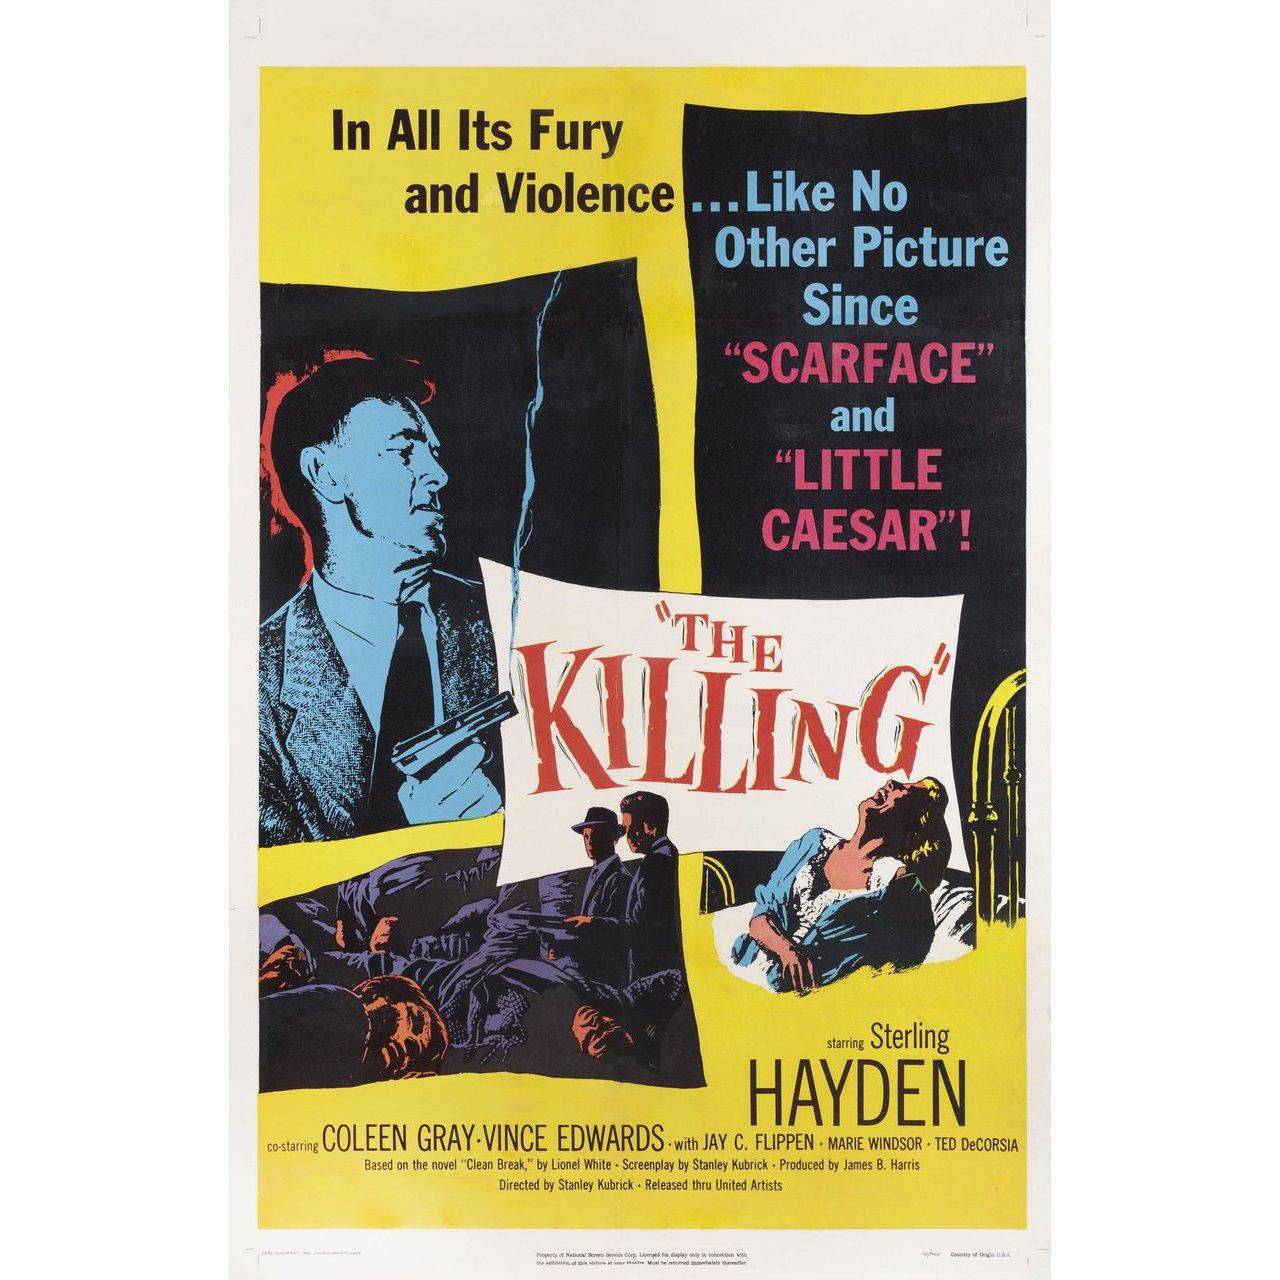 Original 1956 U.S. one sheet poster for the film The Killing directed by Stanley Kubrick with Sterling Hayden / Coleen Gray / Vince Edwards / Jay C. Flippen. Fine condition, linen-backed. This poster has been professionally linen-backed. Please